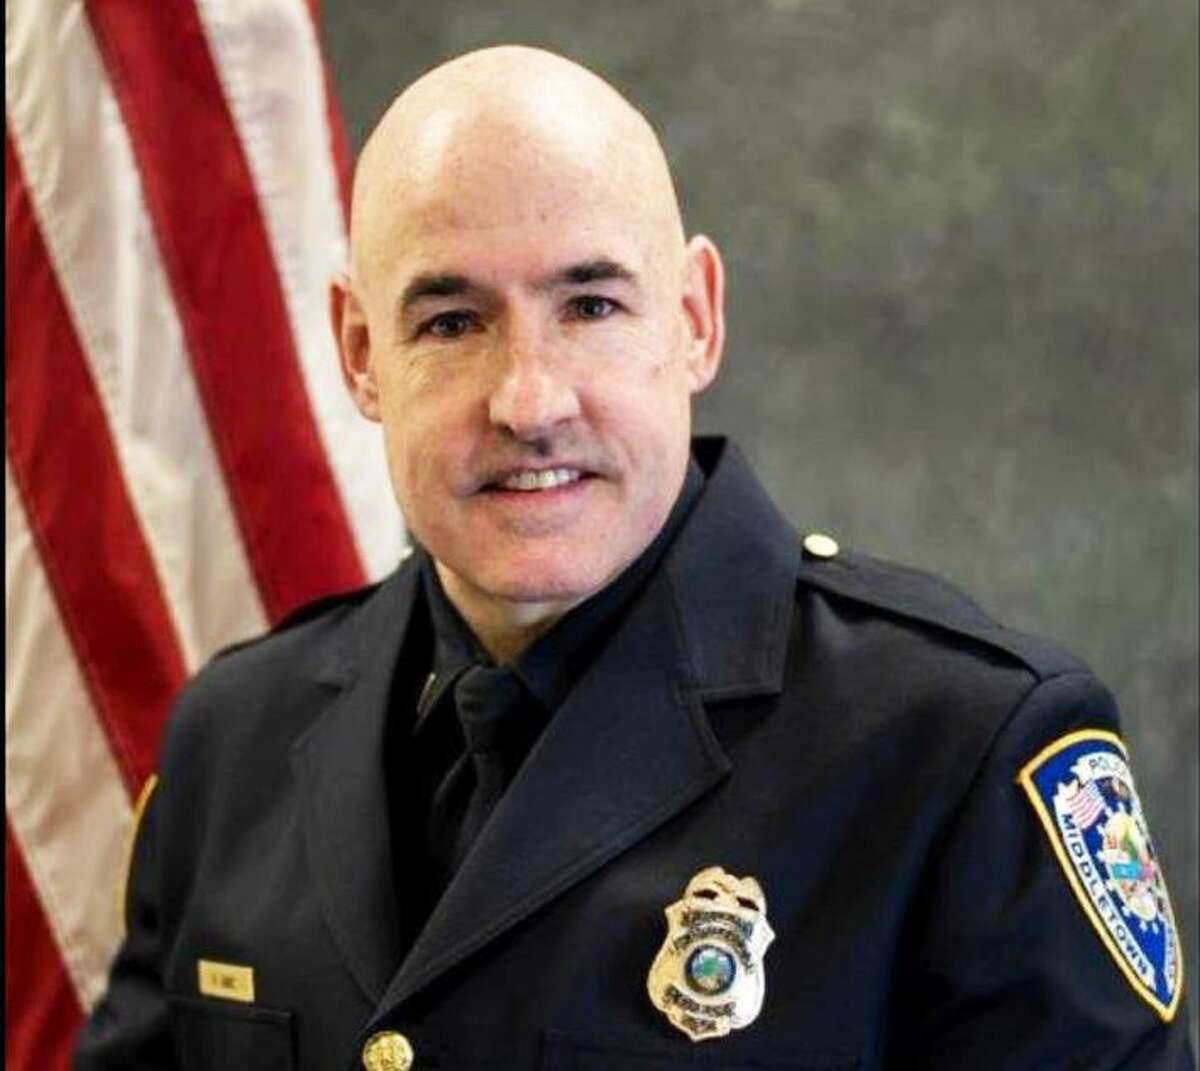 Middletown Police Capt. Richard Davis, a 22-year veteran of the force, is the city’s new deputy police chief.